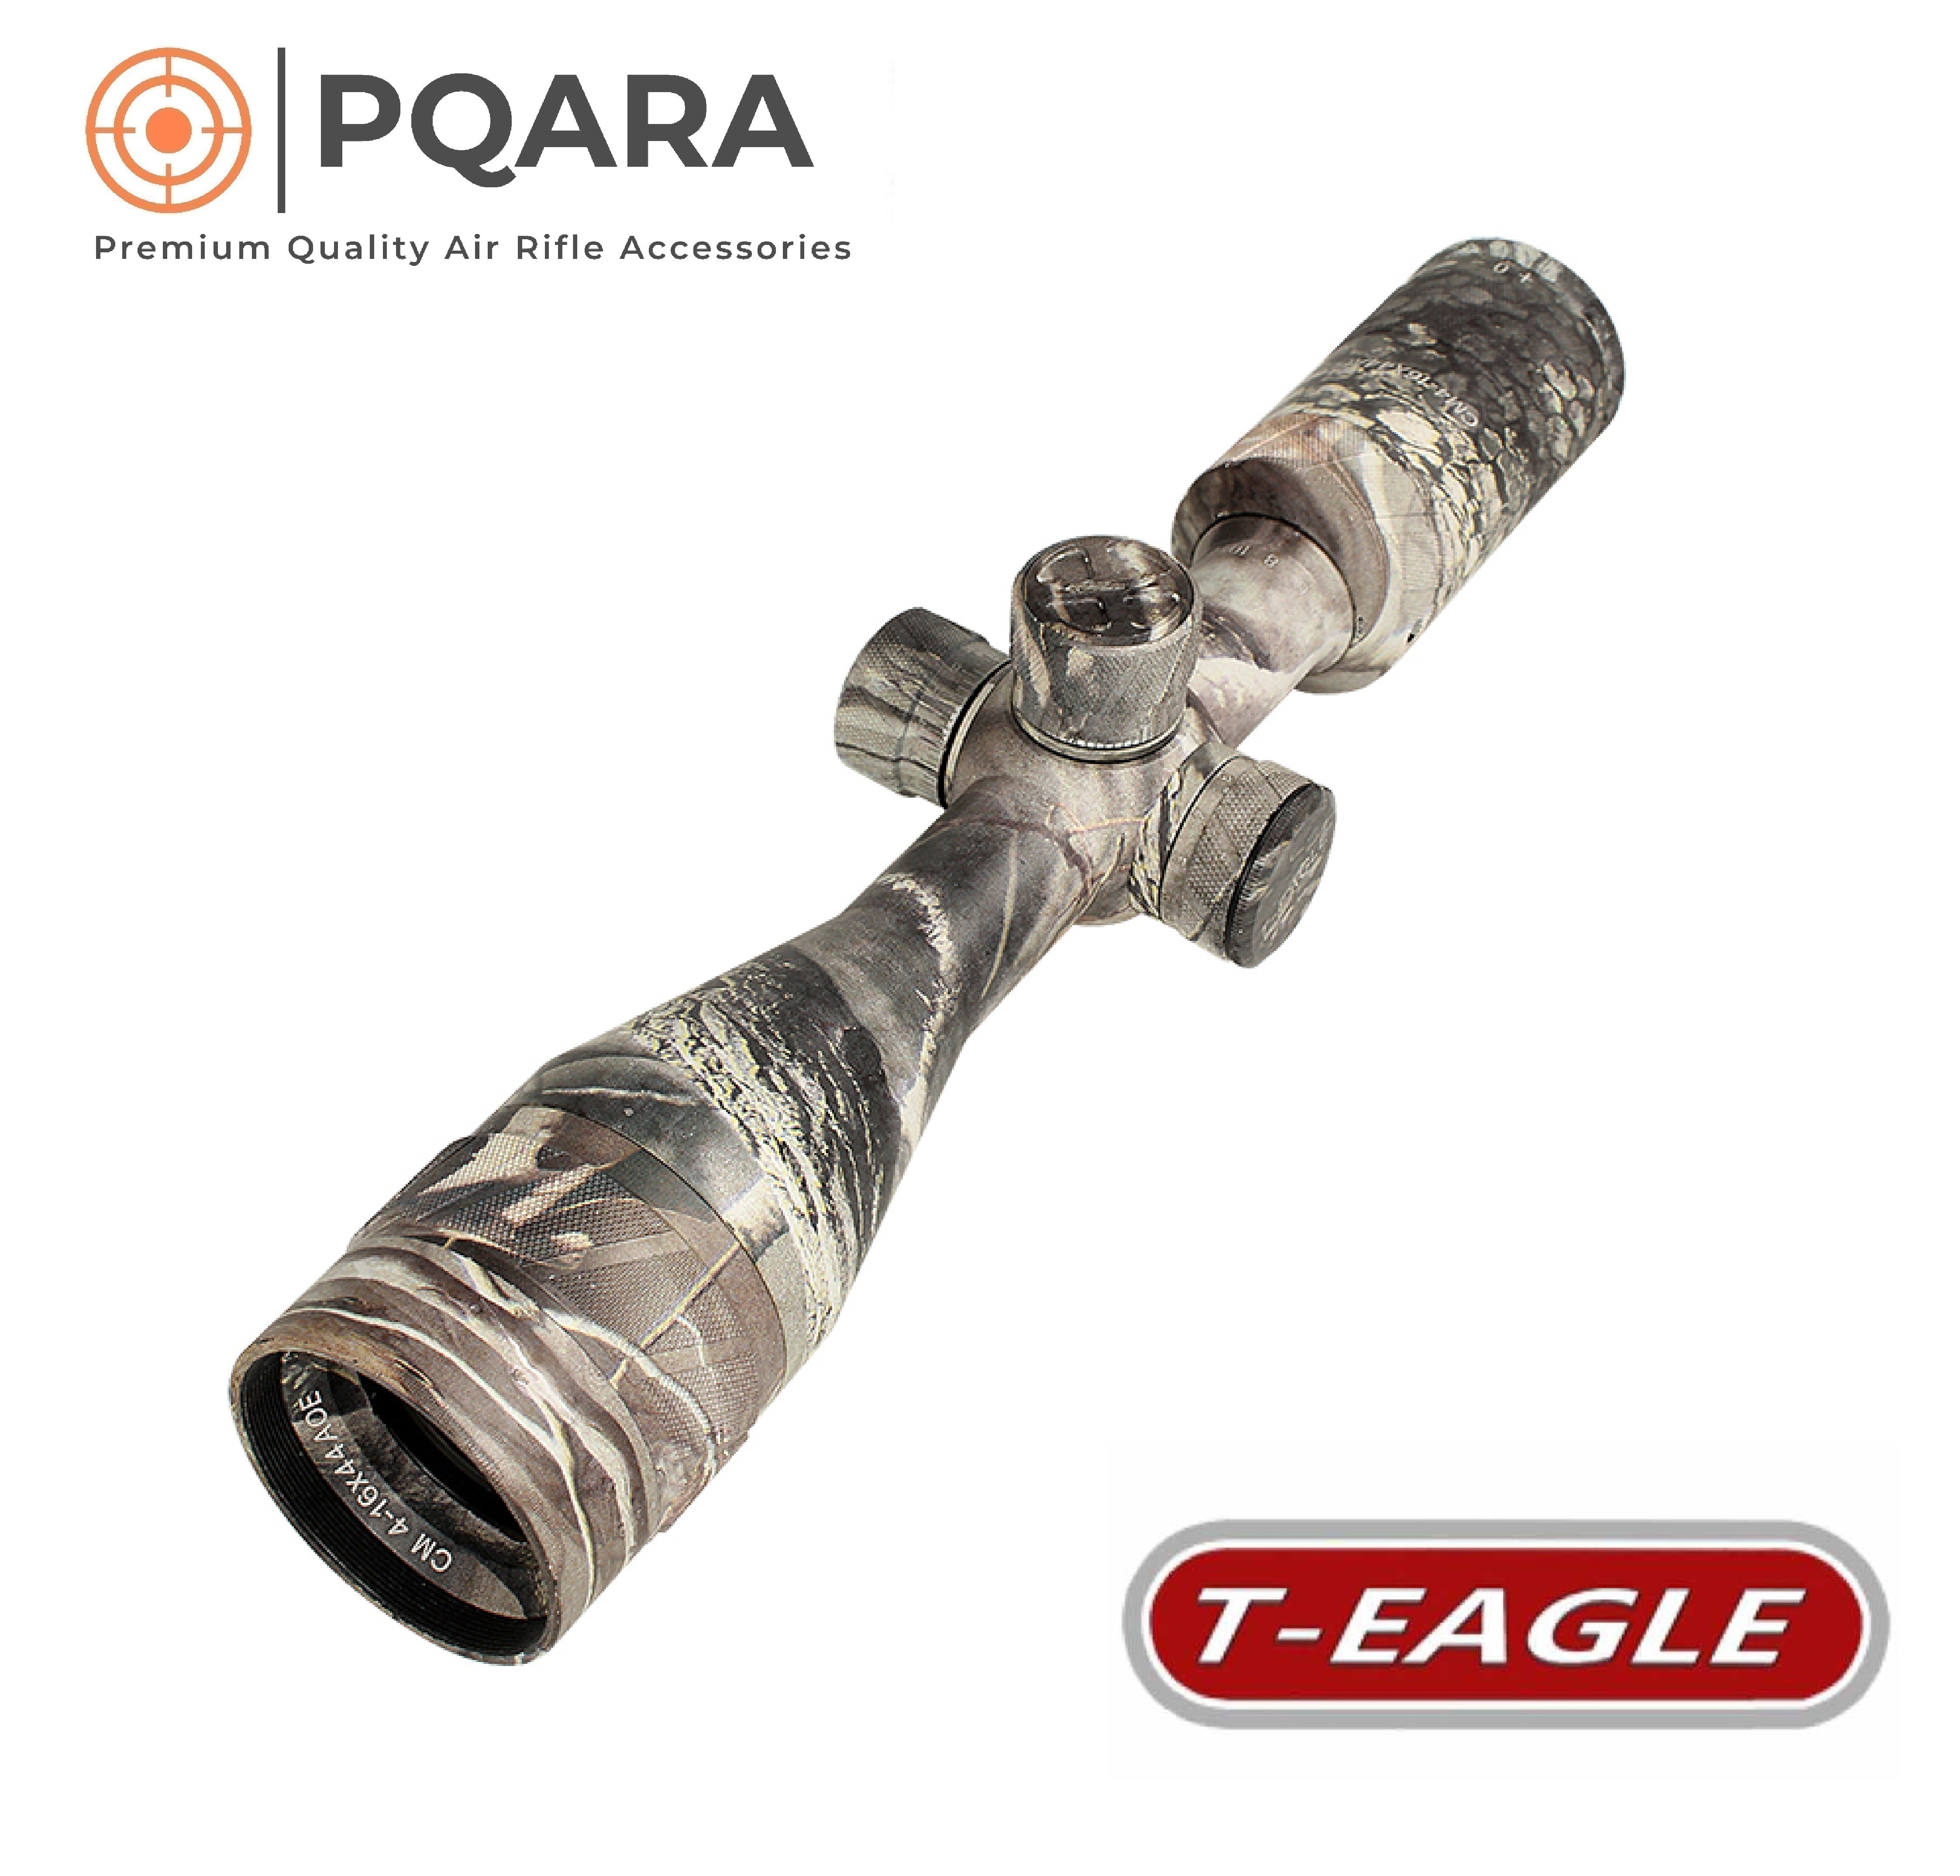 T-Eagle CM4-16x44AOE Tactical Riflescope Camouflage Hunting Scopes